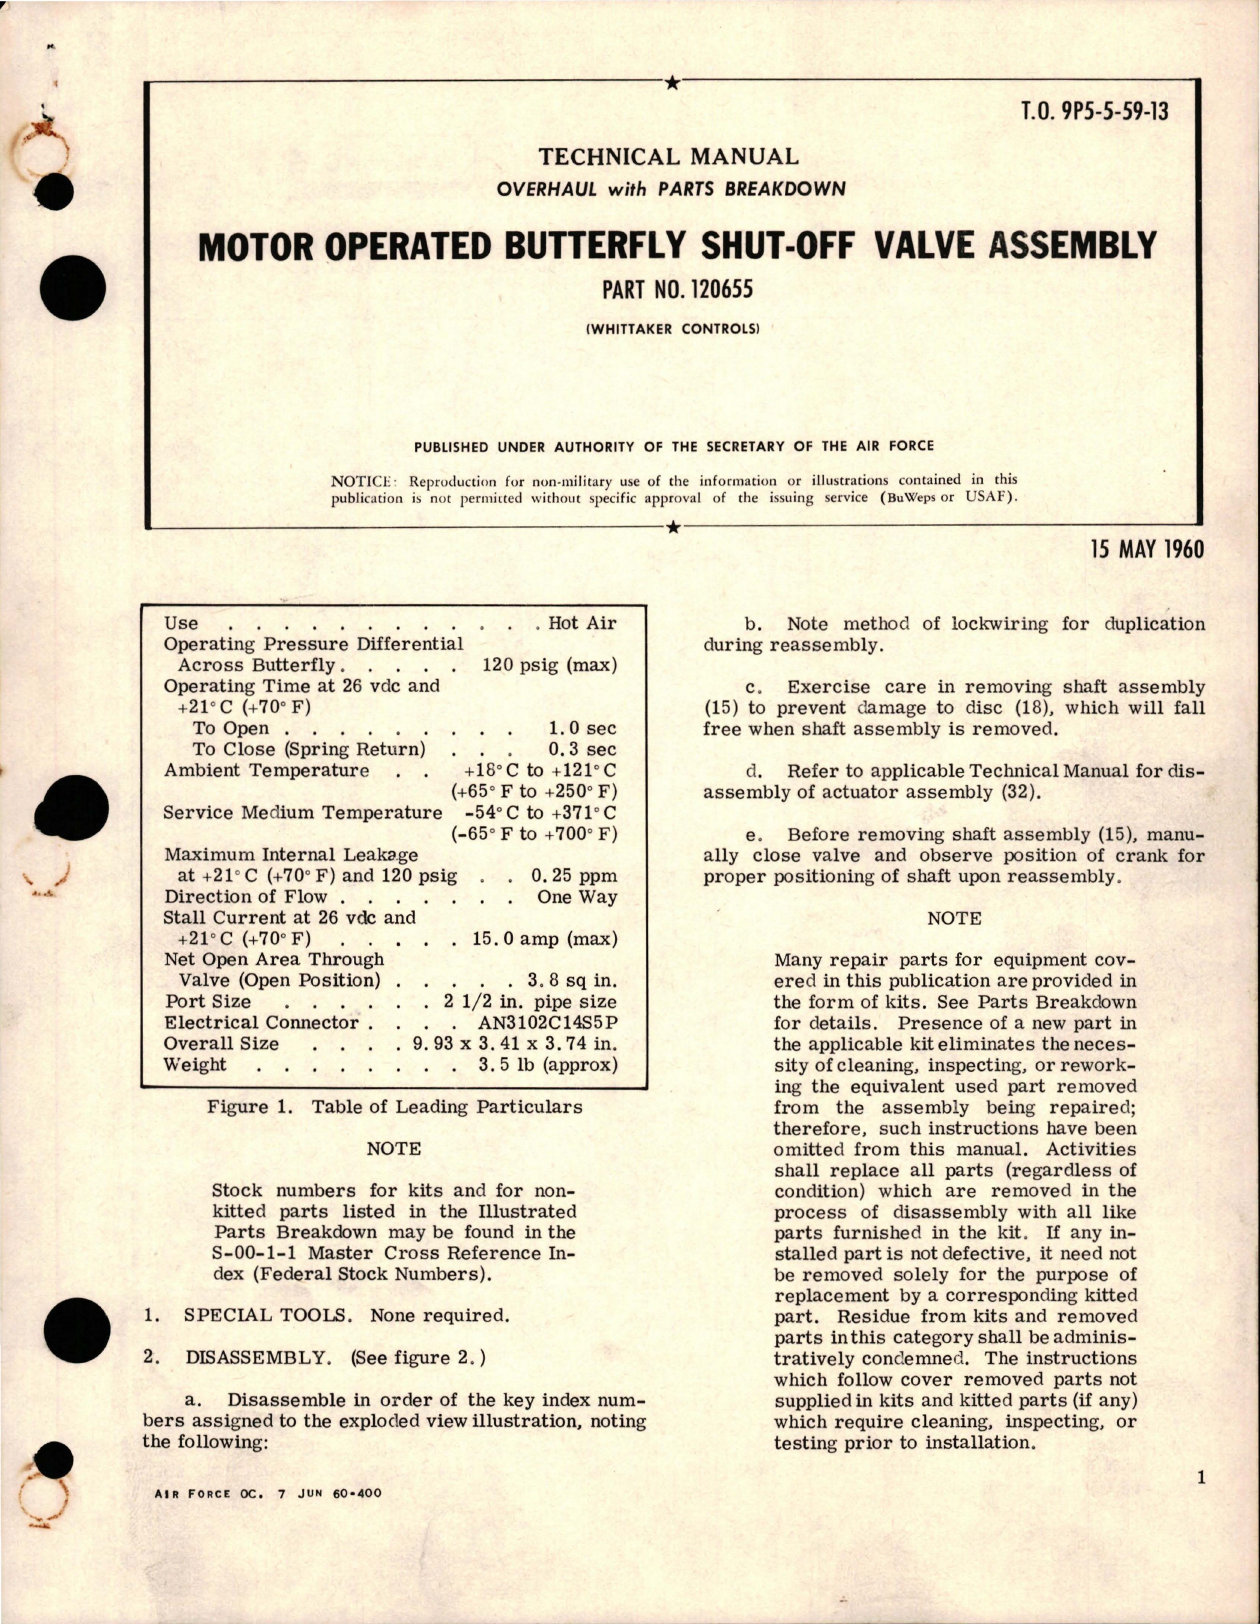 Sample page 1 from AirCorps Library document: Overhaul with Parts Breakdown for Motor Operated Butterfly Shut-Off Valve Assembly - Part 120655